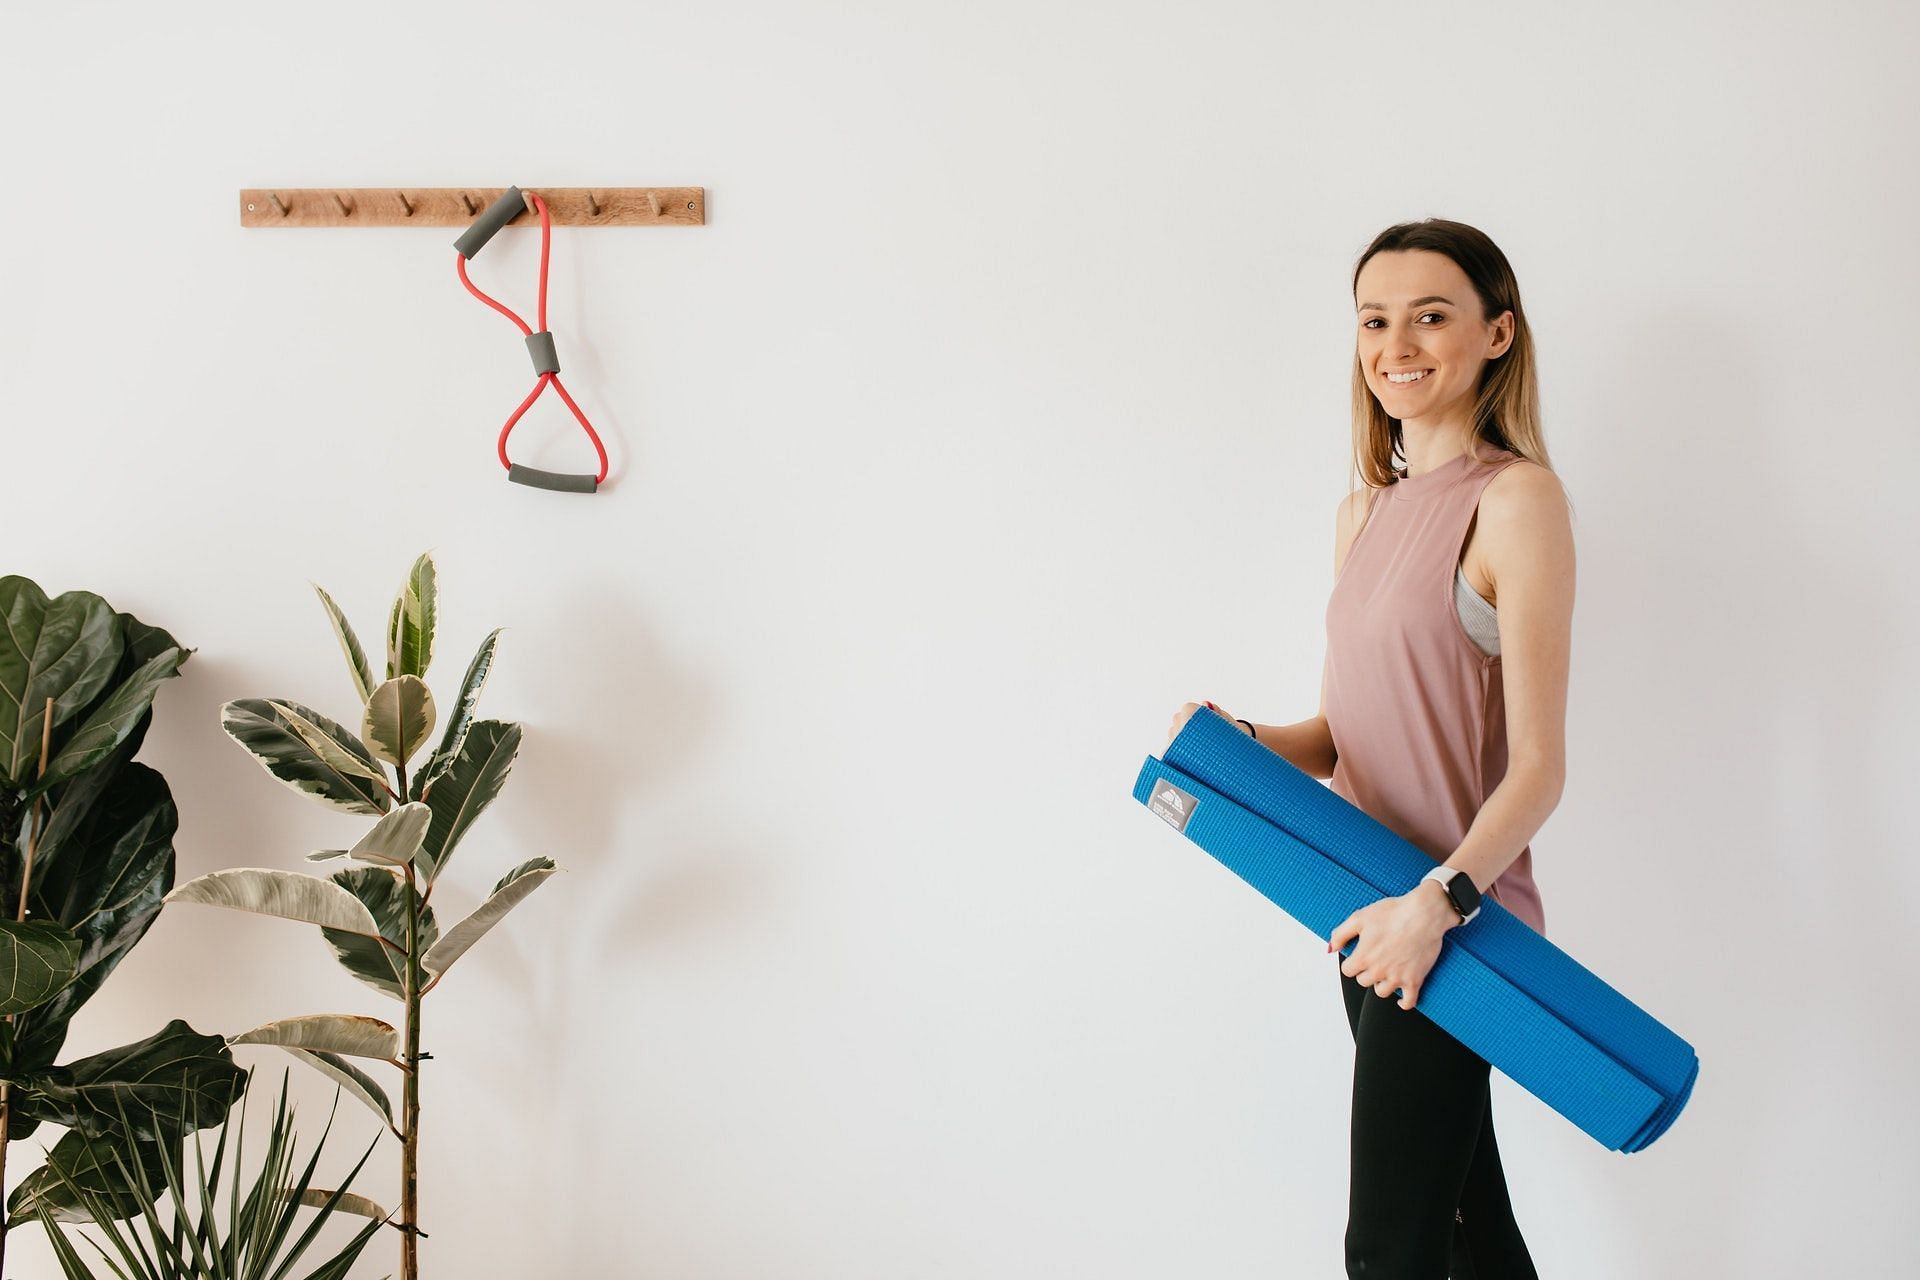 The Pilates stance prepares you for other exercises in Pilates. (Photo by Karolina Grabowska via pexels)